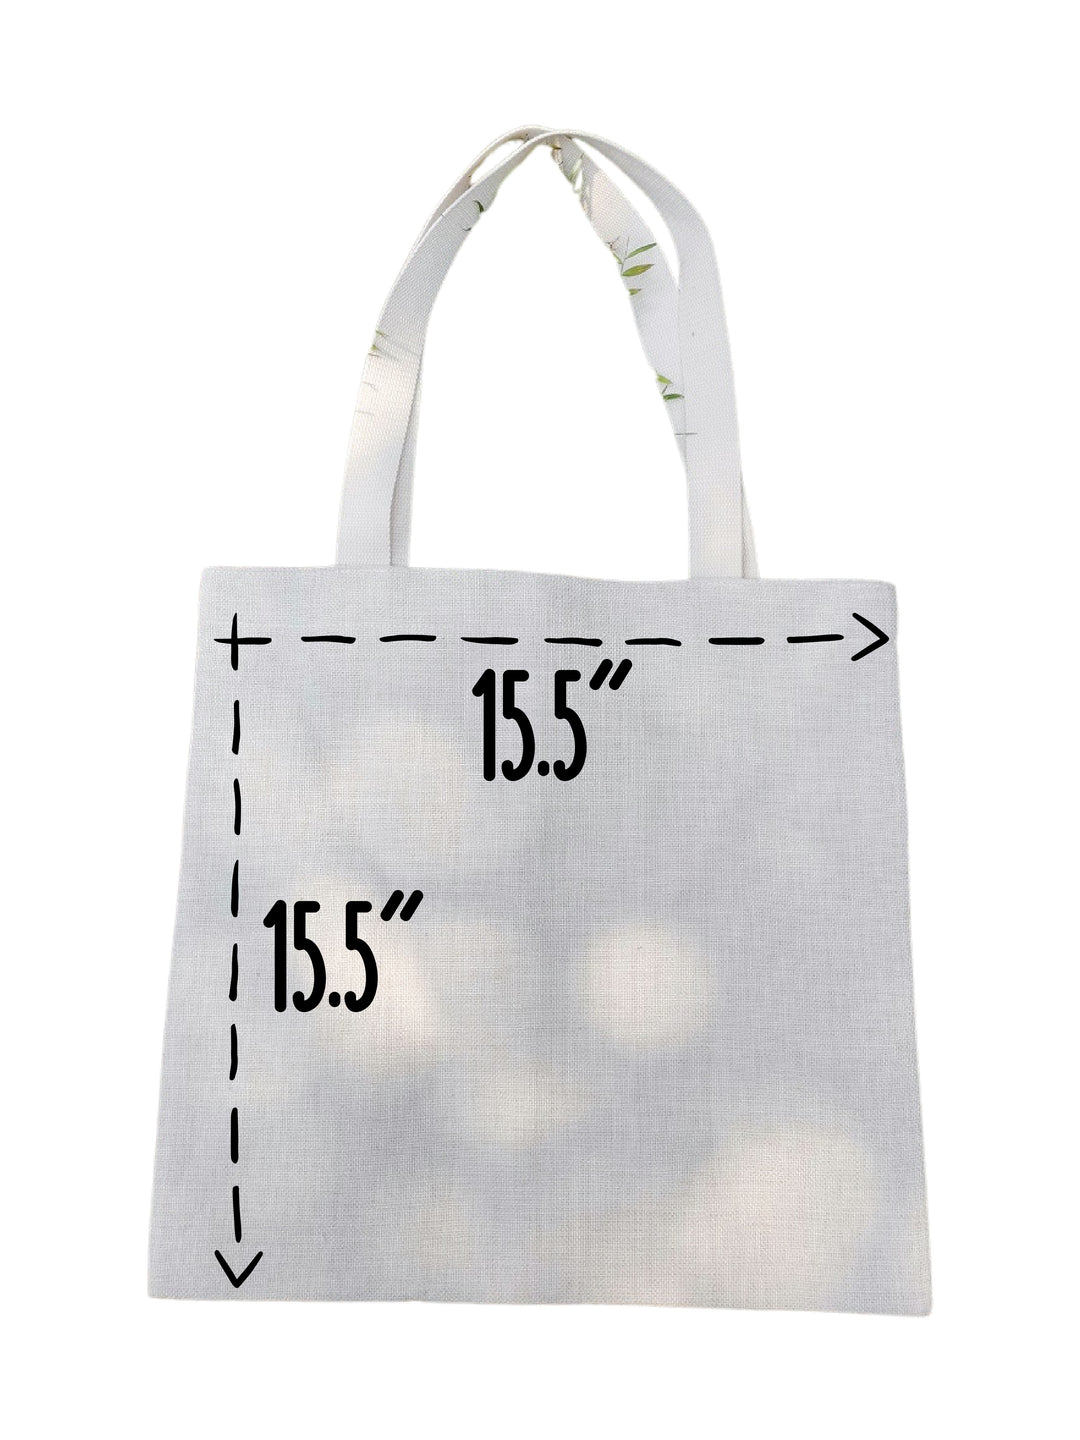 Halloween Floral Ghost Linen Tote Bag - Simply Crafty